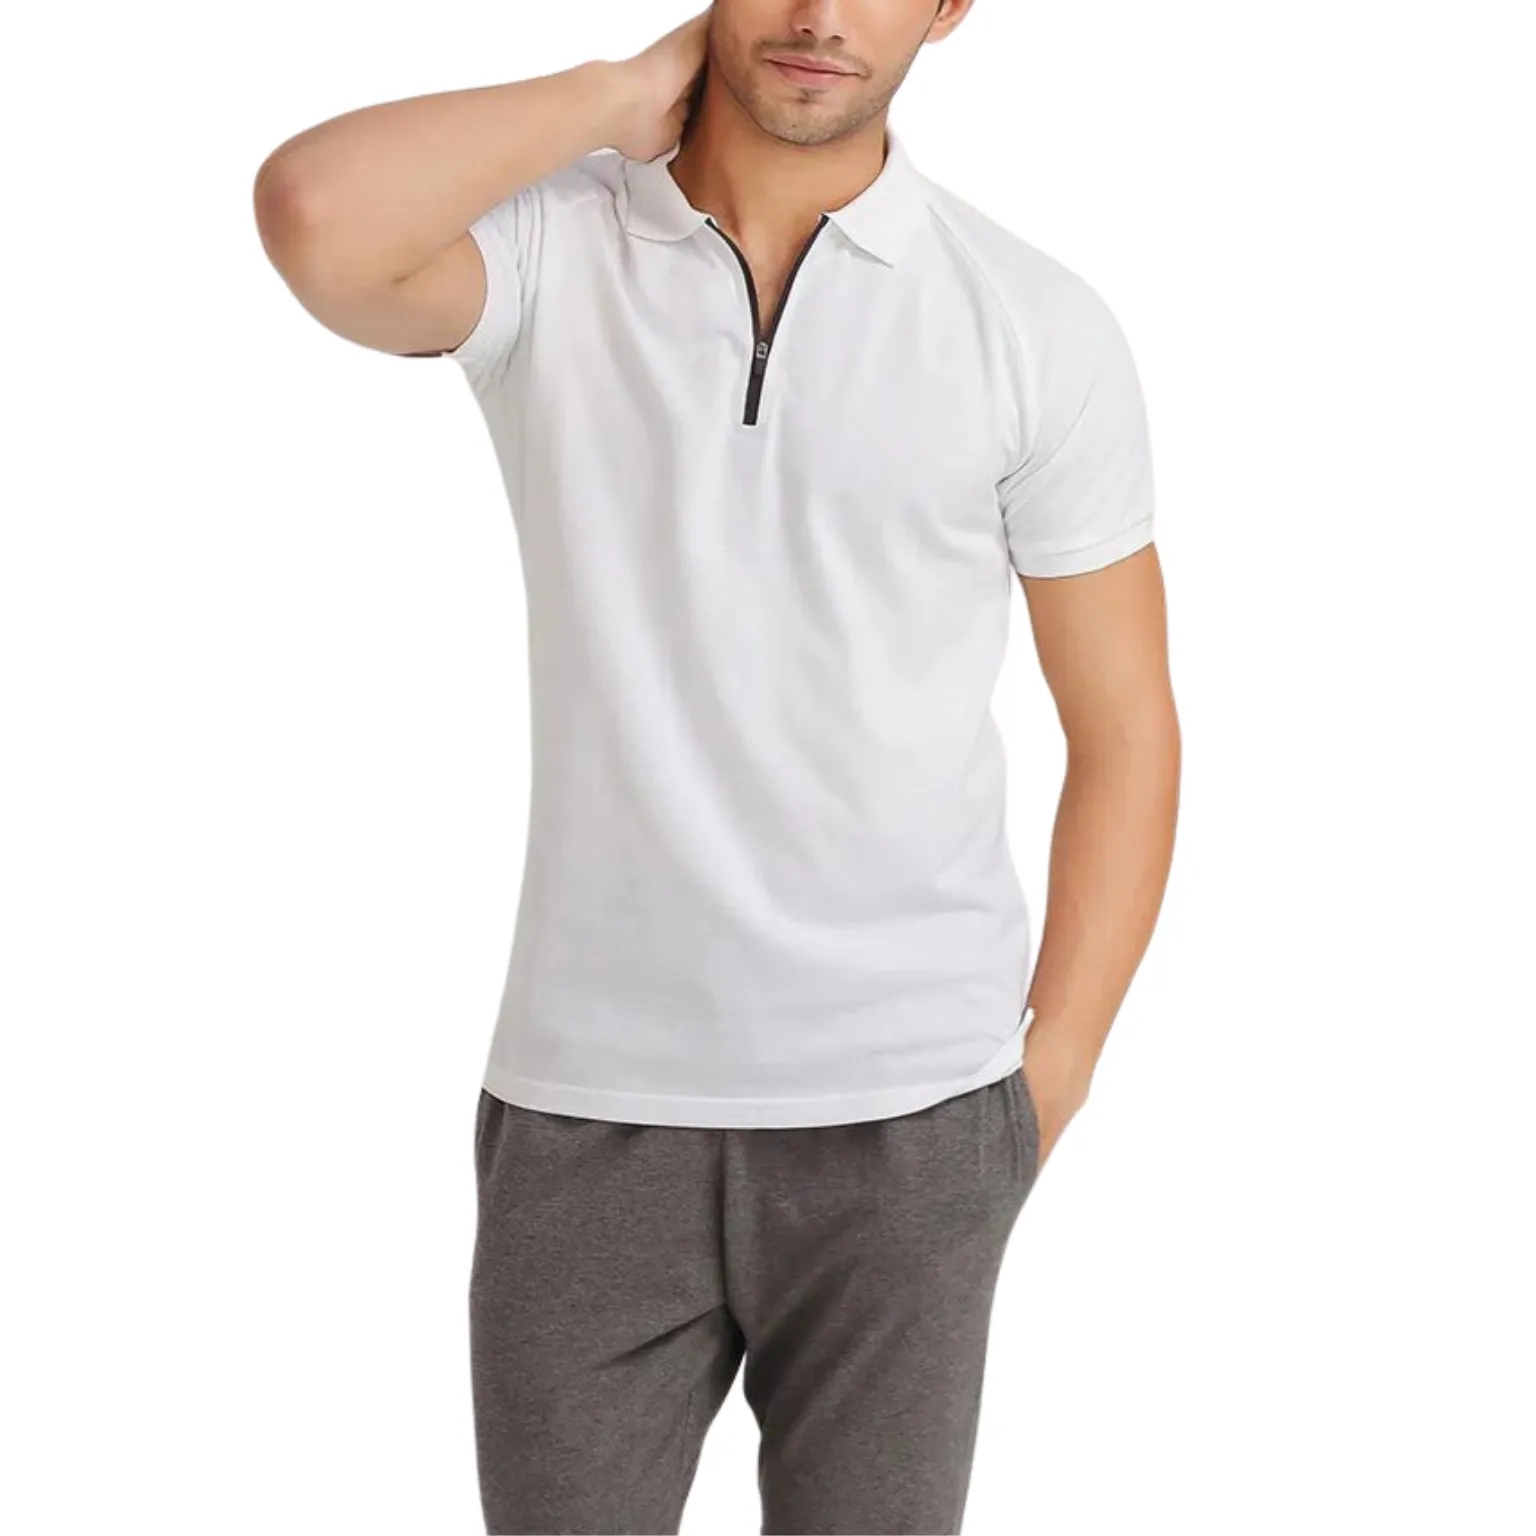 Zipper Polo Shirts manufacturing with trendy design